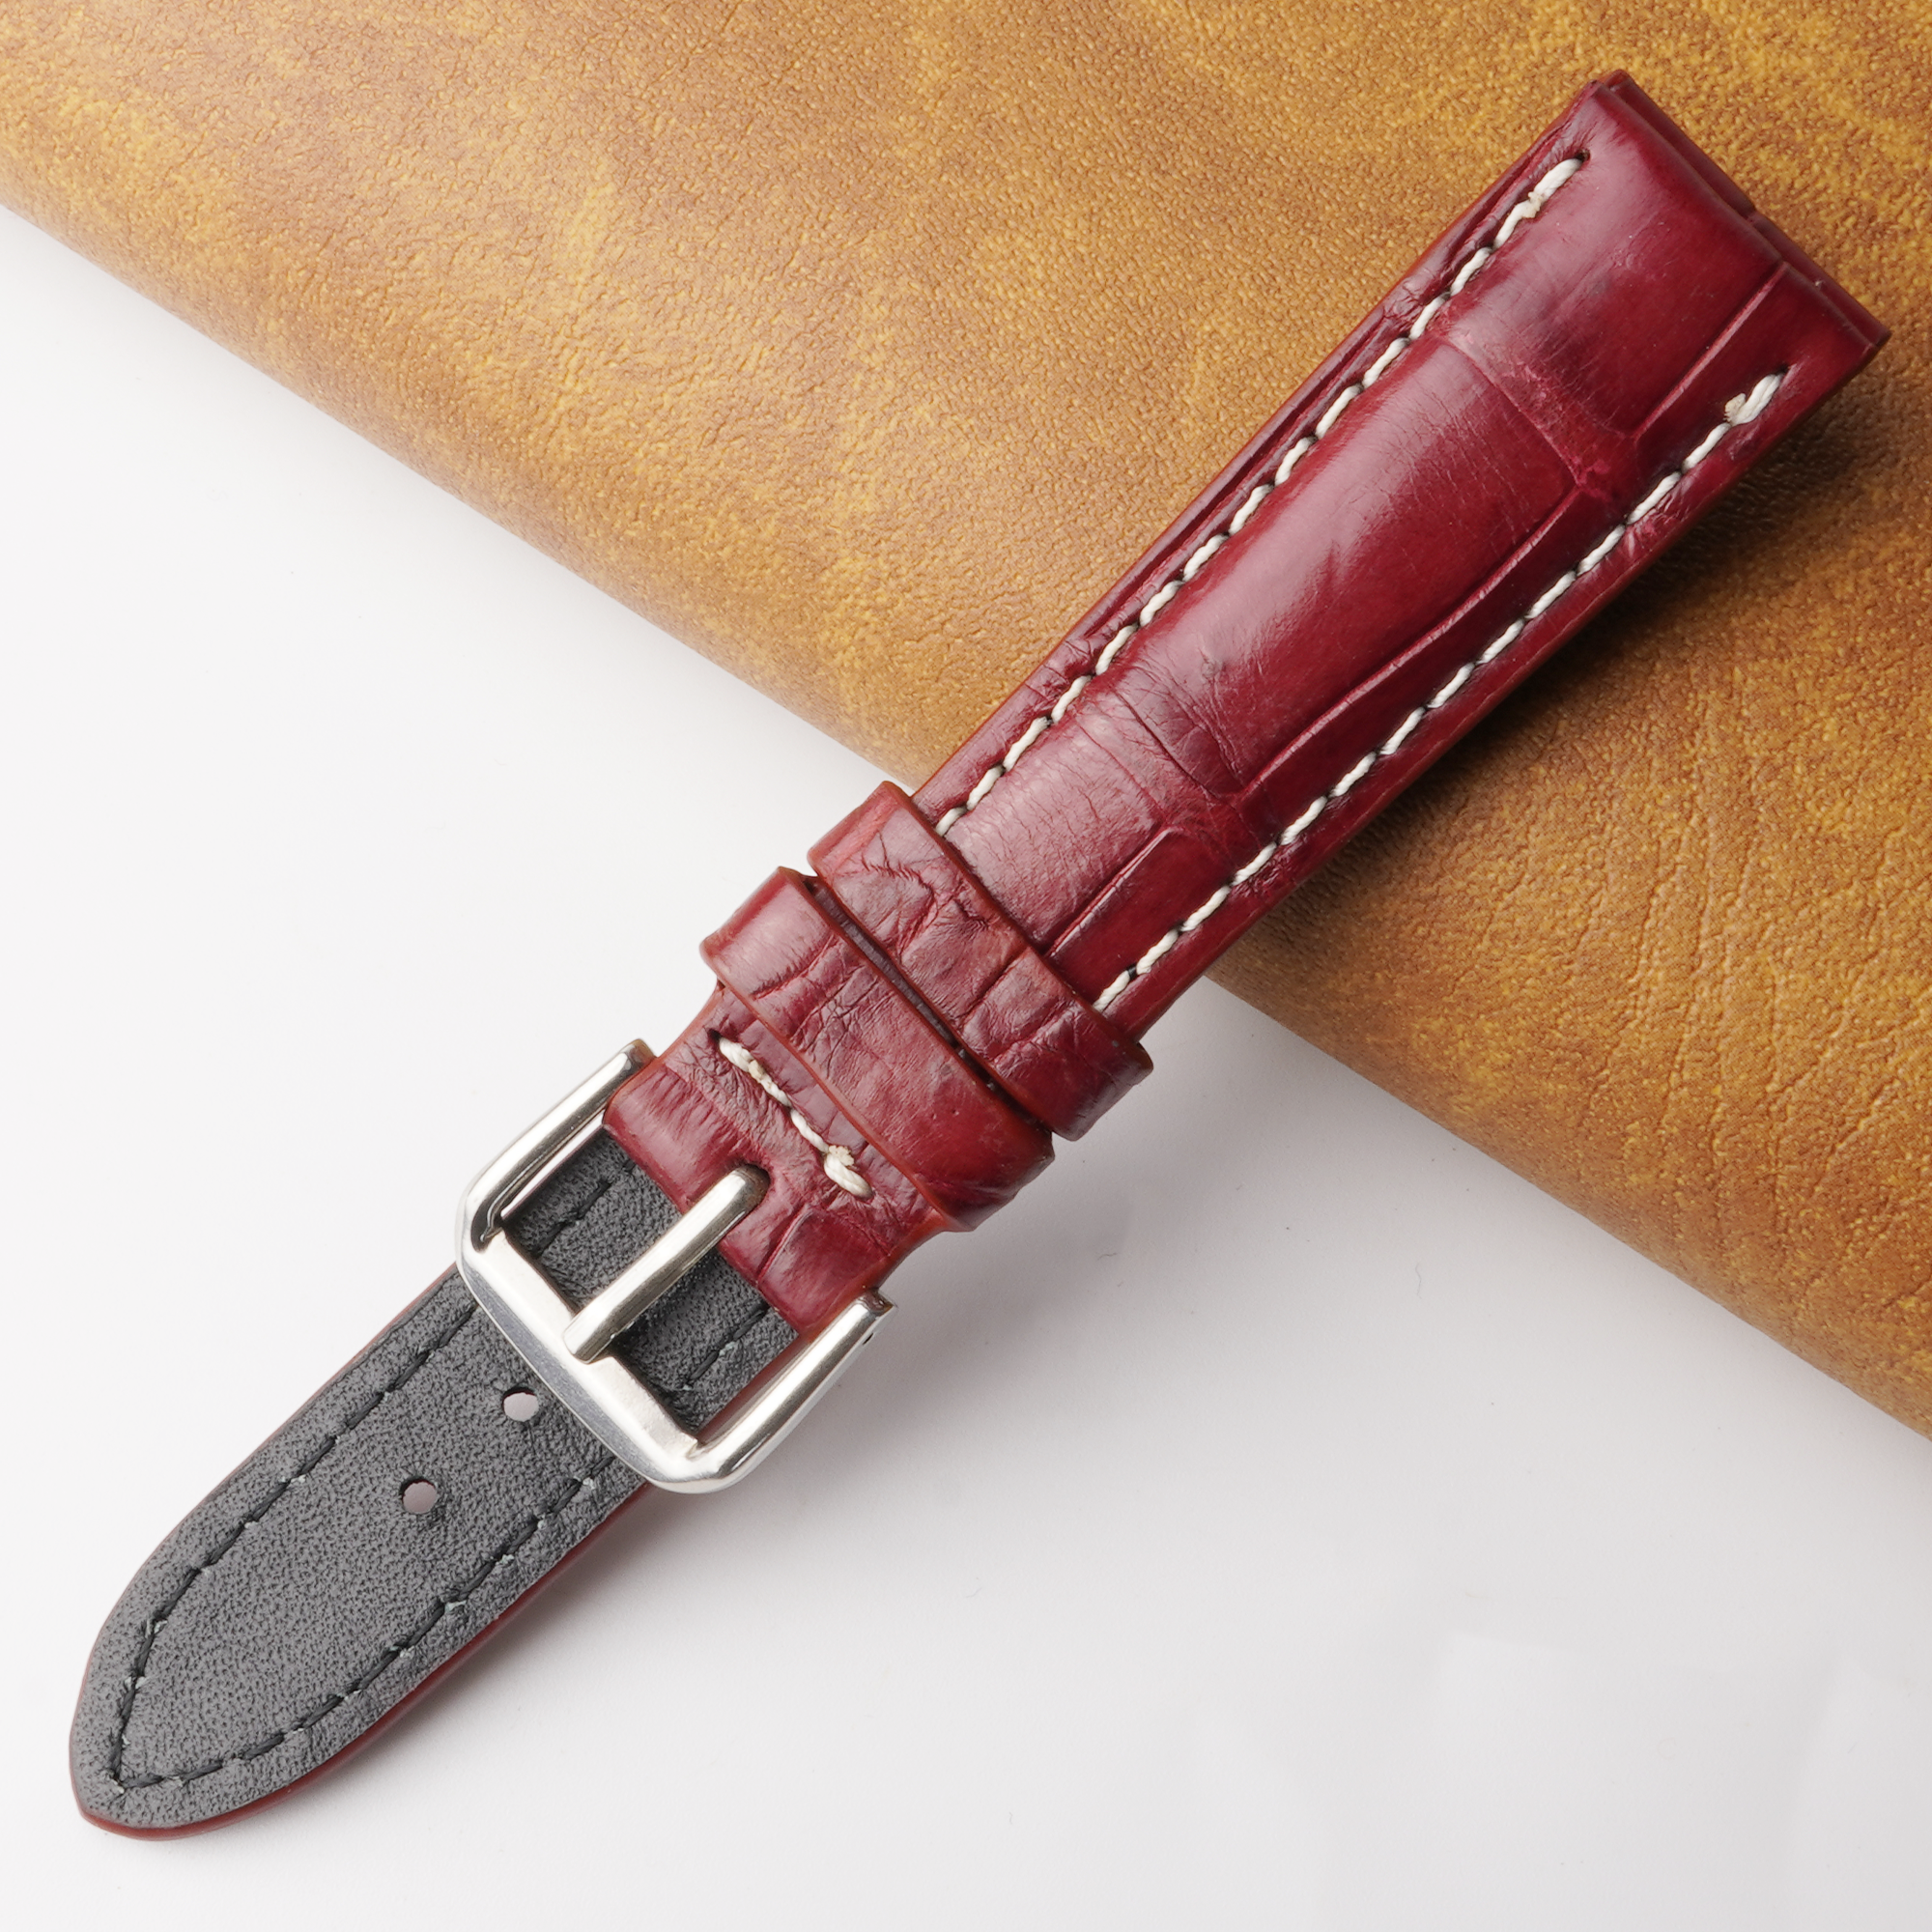 20mm Burgundy Unique Alligator Leather Watch Band For Men | DH-224C